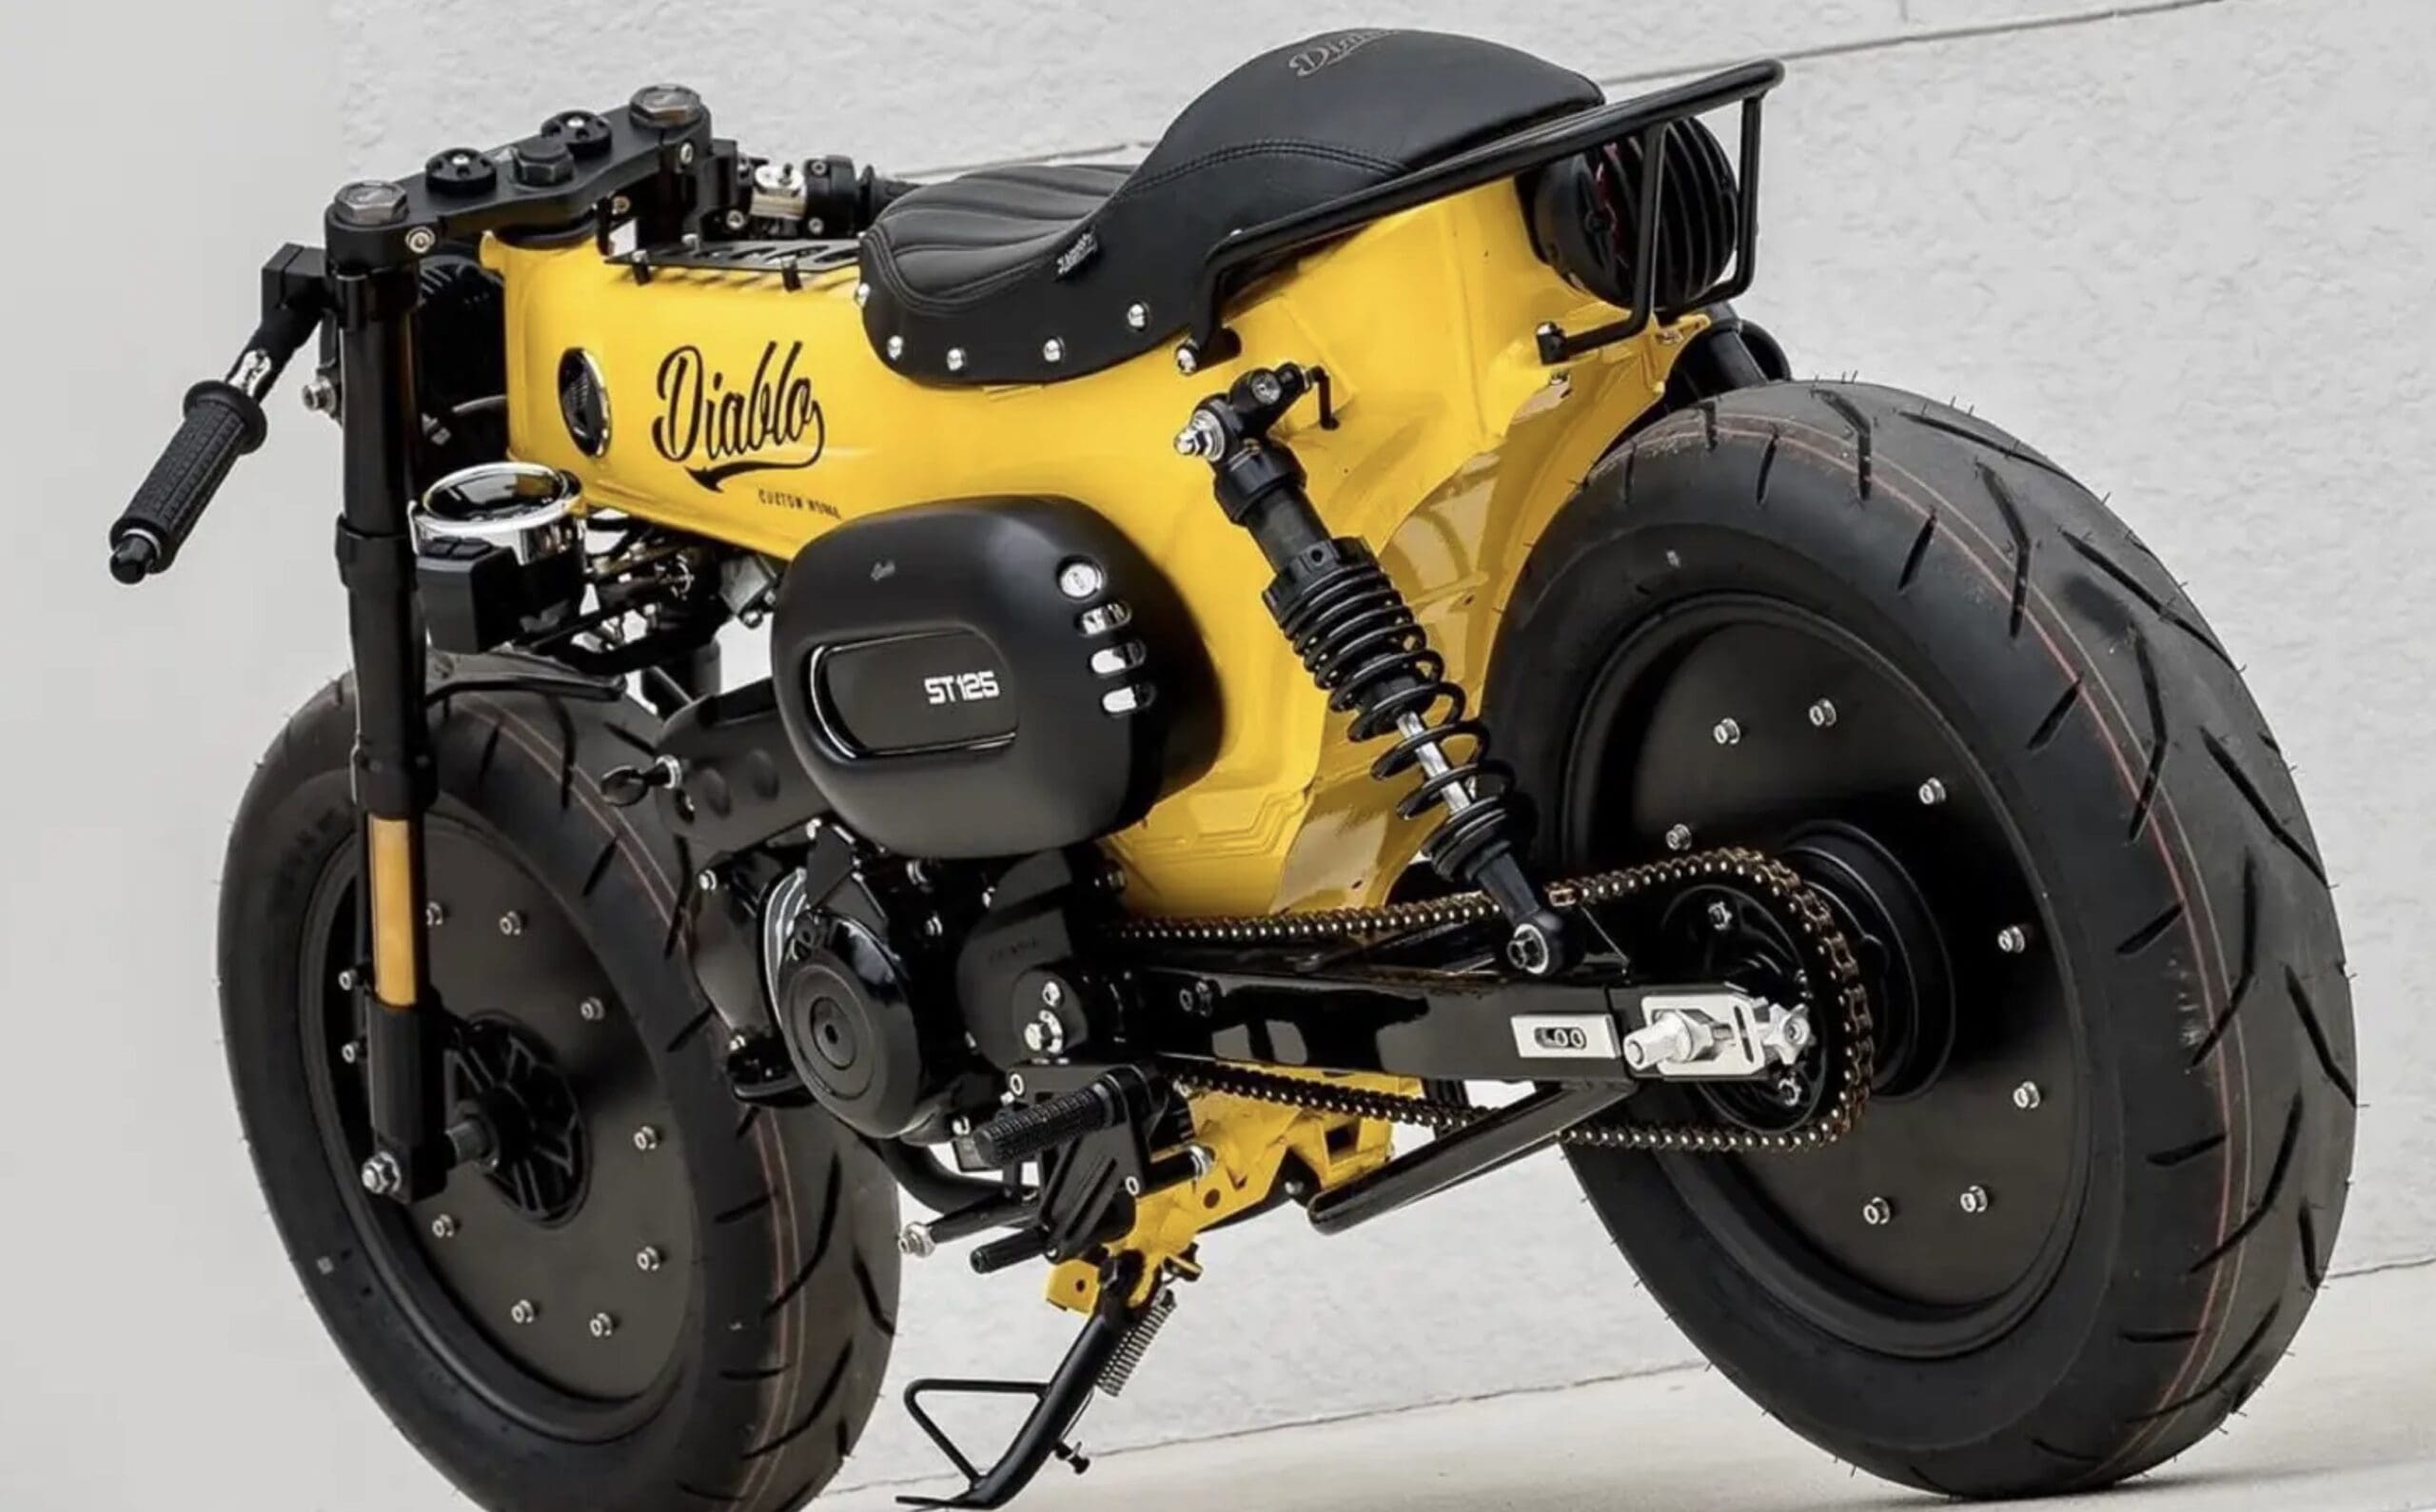 "Daxxer," a custom Honda Dax 125 from the garage of Thai-based K-Speed. Media sourced from Top Speed.